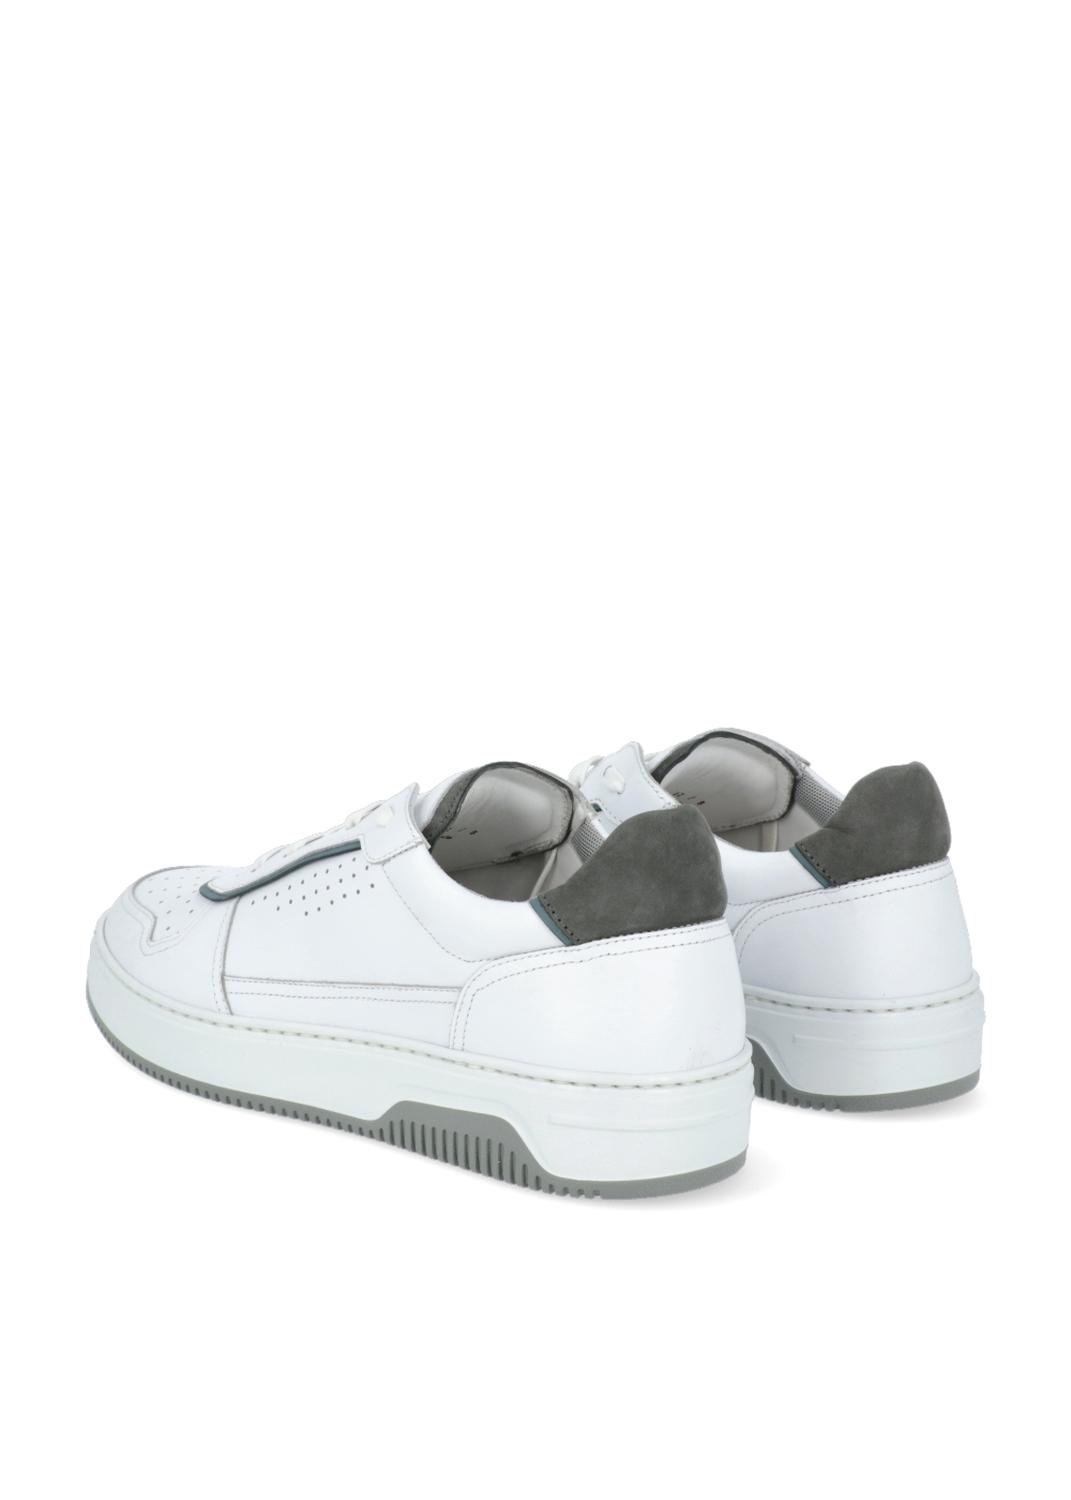 Magnanni Sneakers MGN-25627